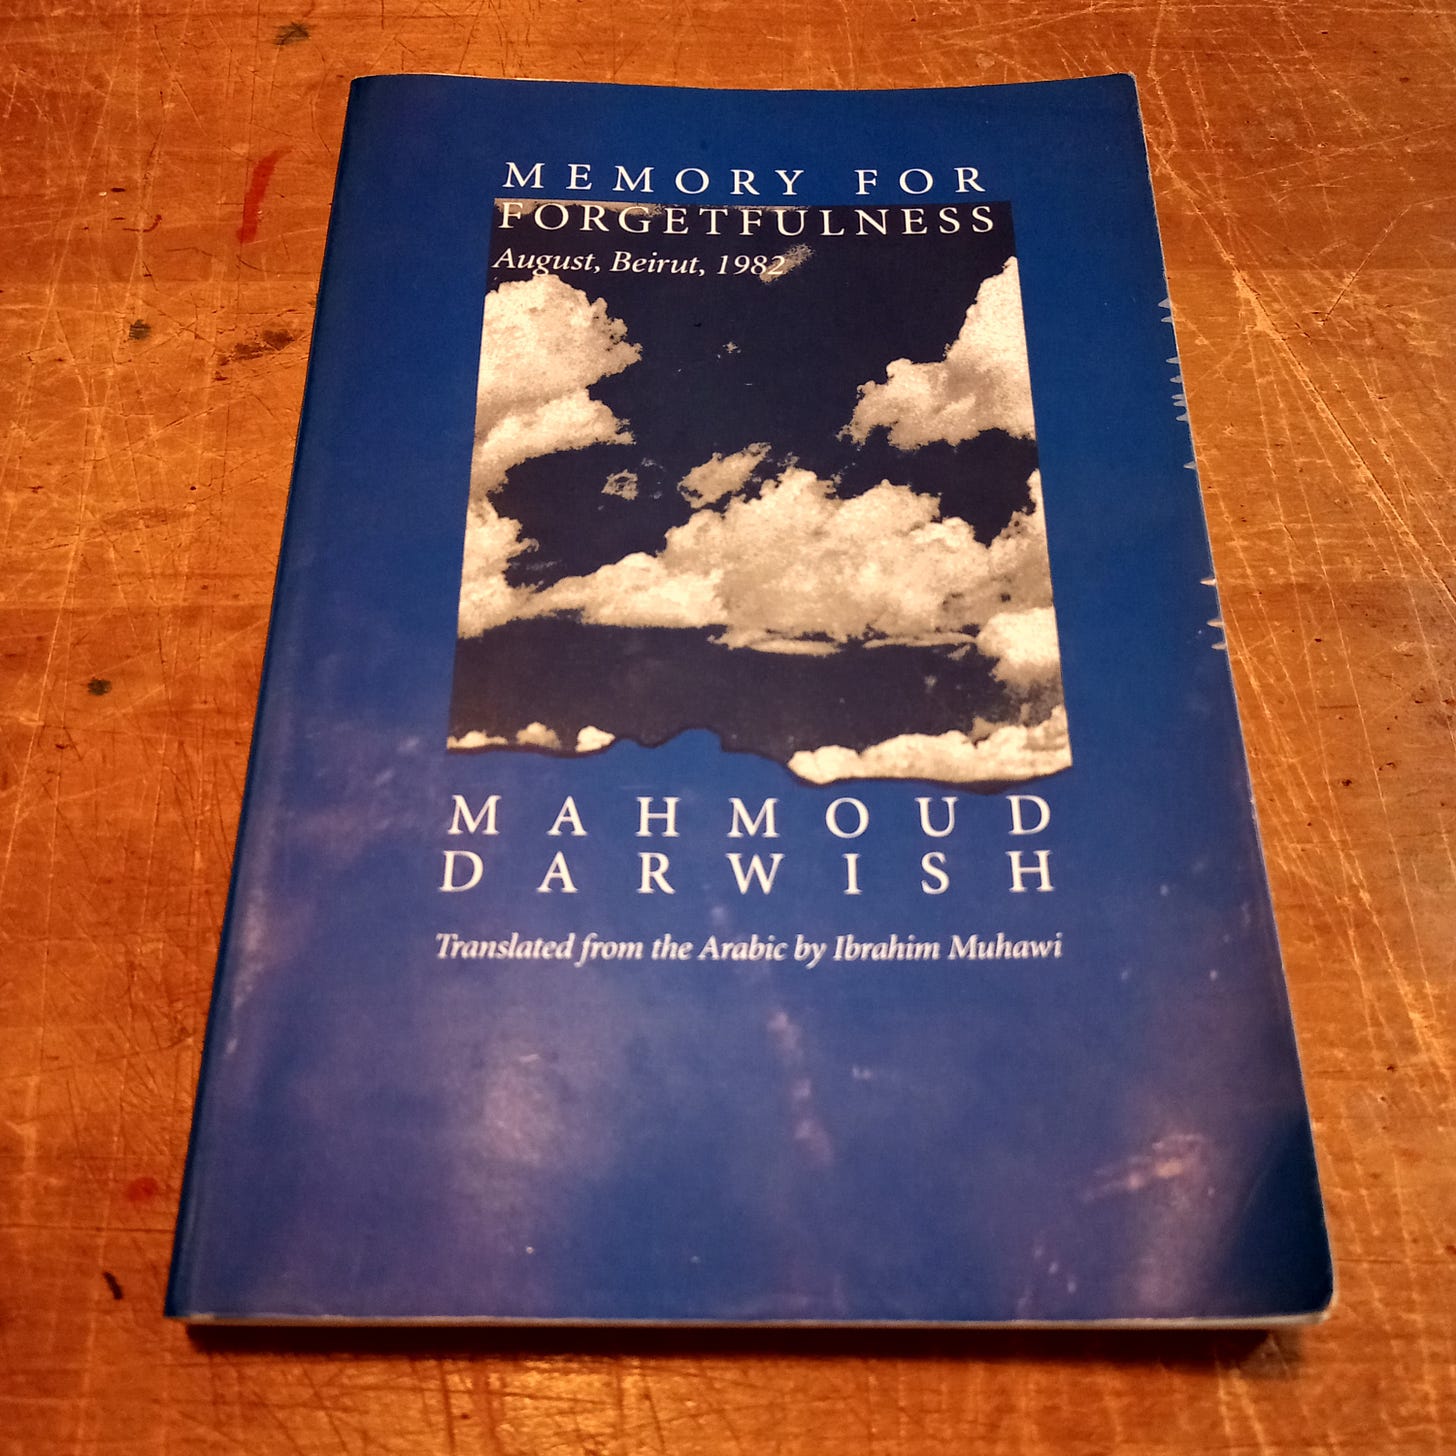 A copy of Mahmoud Darwish's Memory for Forgetfulness, with white clouds on a blue cover